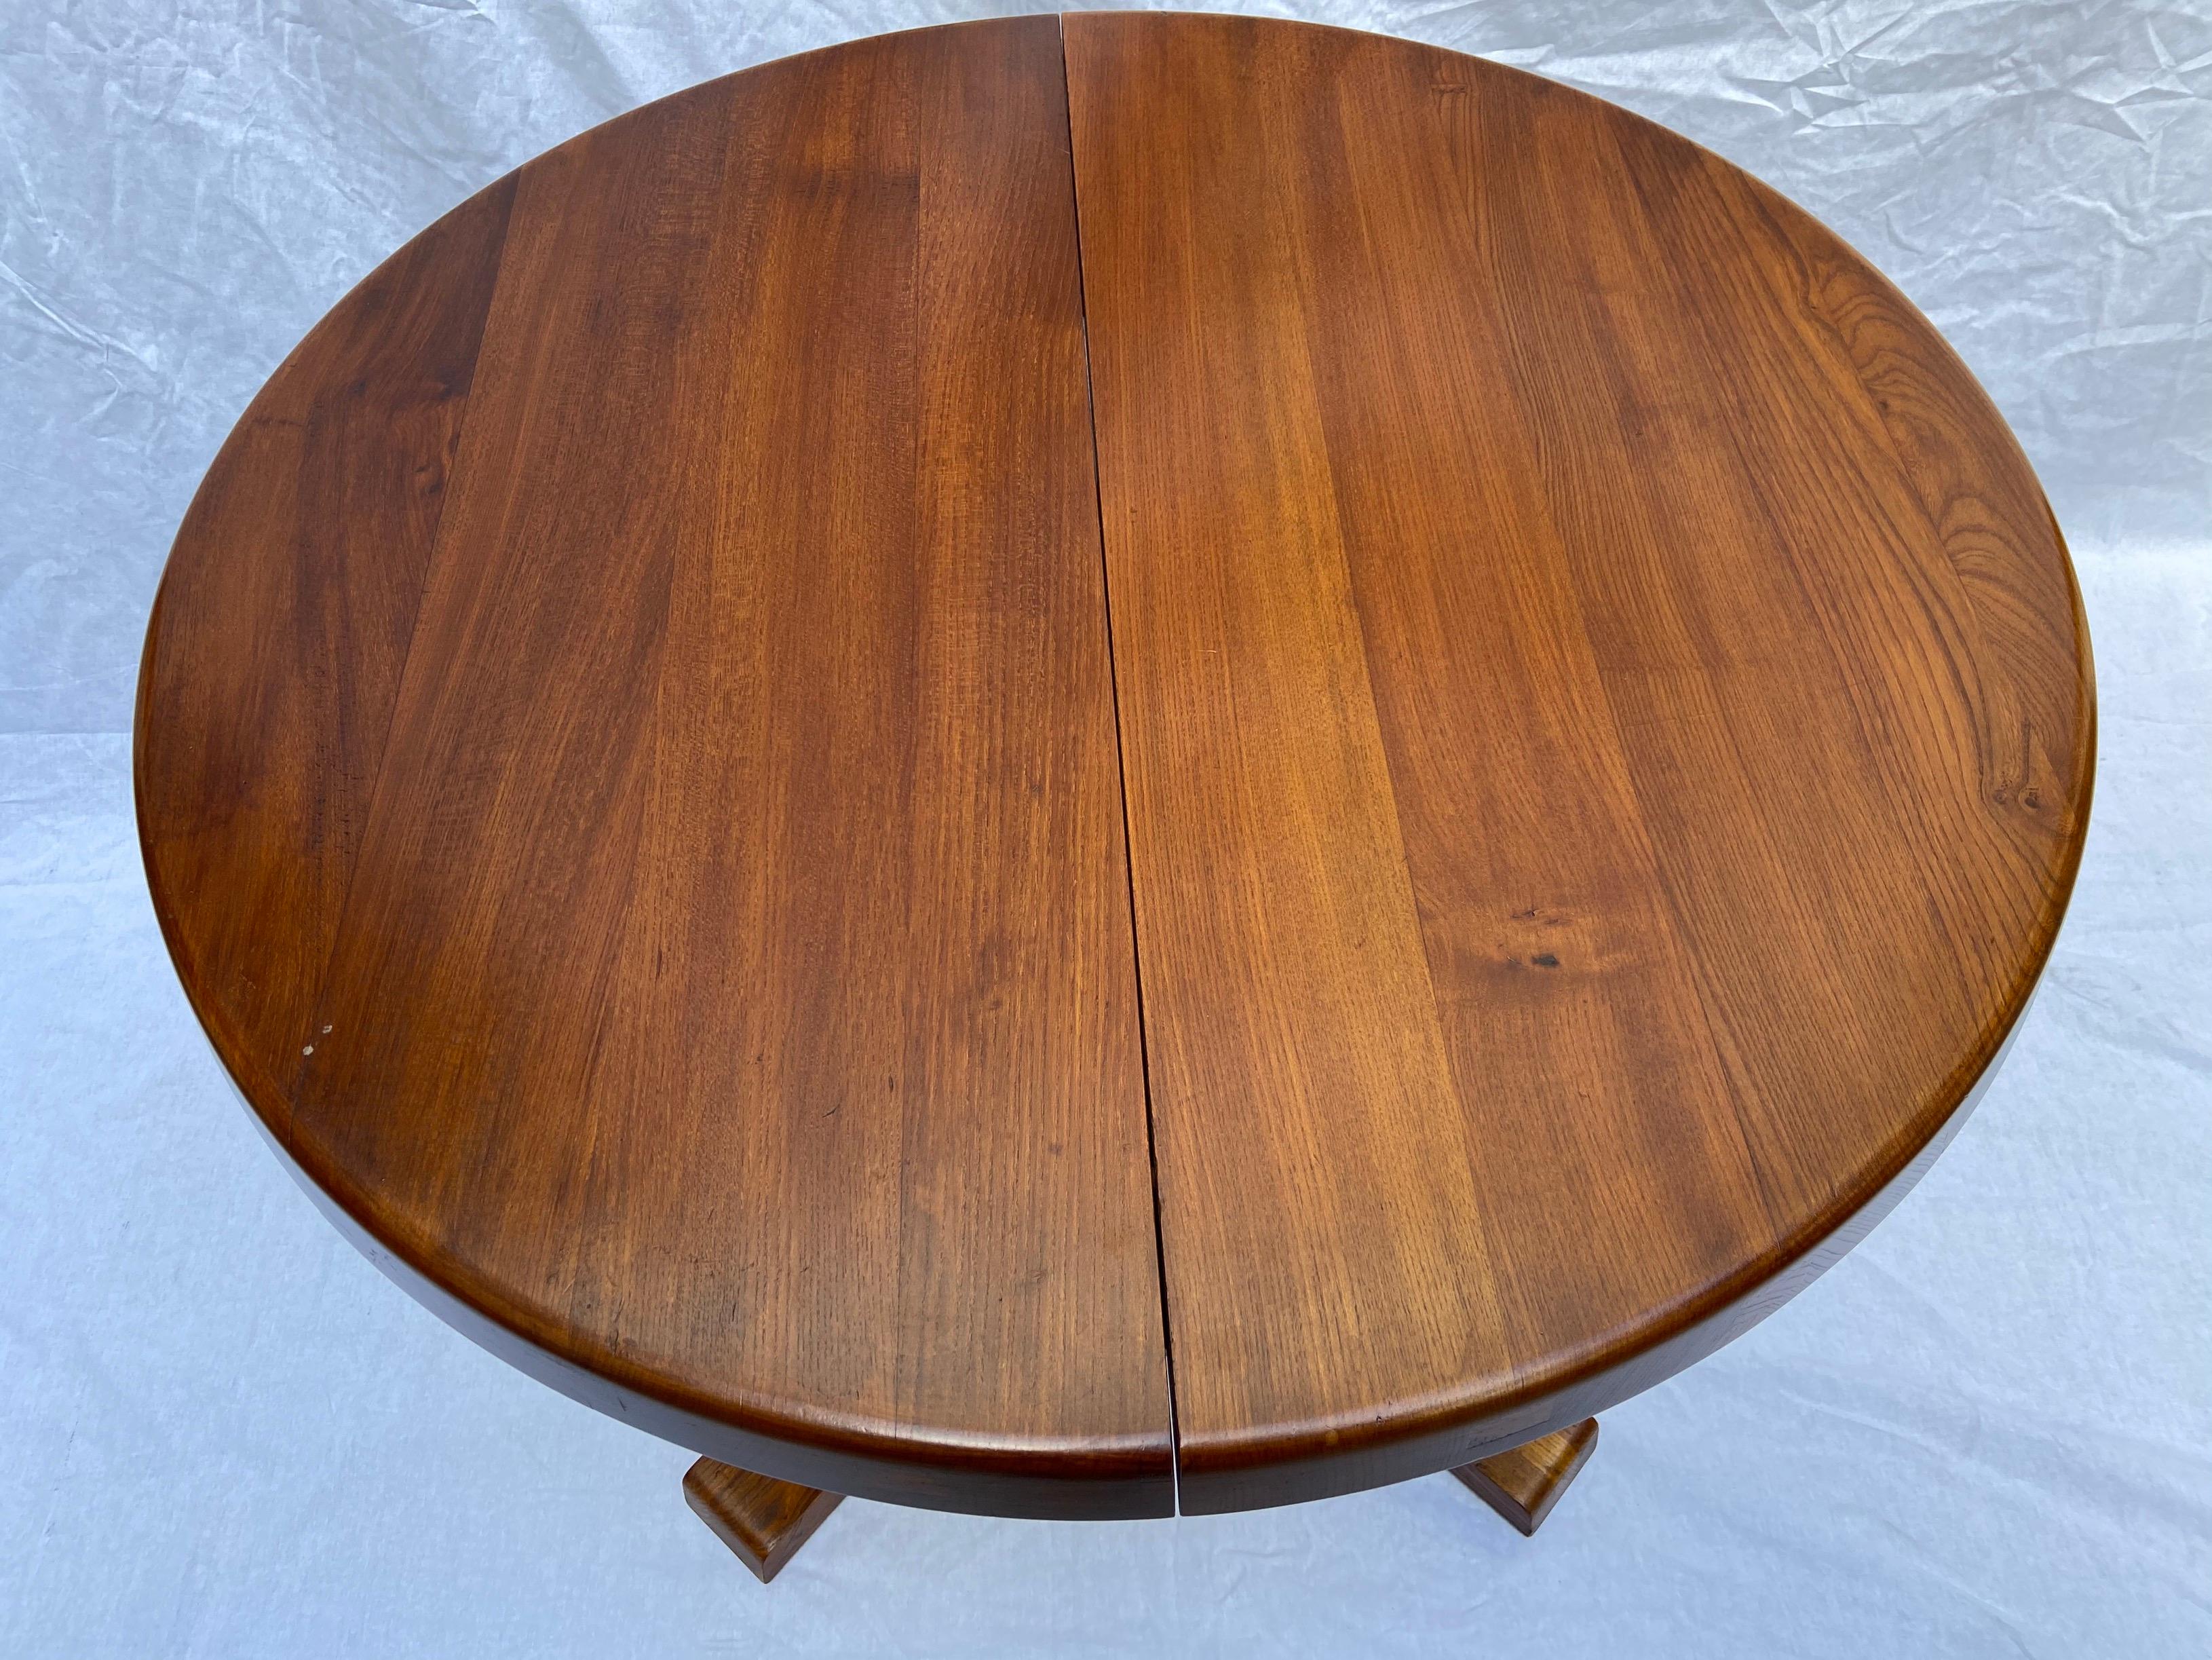 Pierre Chapo - Table T40 known as duck feet - Circa 1978

Circular table with 2 central extensions
Solid elm

Without extension: D 120 x H 74

With 2 extensions: L 220 x P 120 x H 74

With 1 extension: L 170 x P 120 x H 74.
 